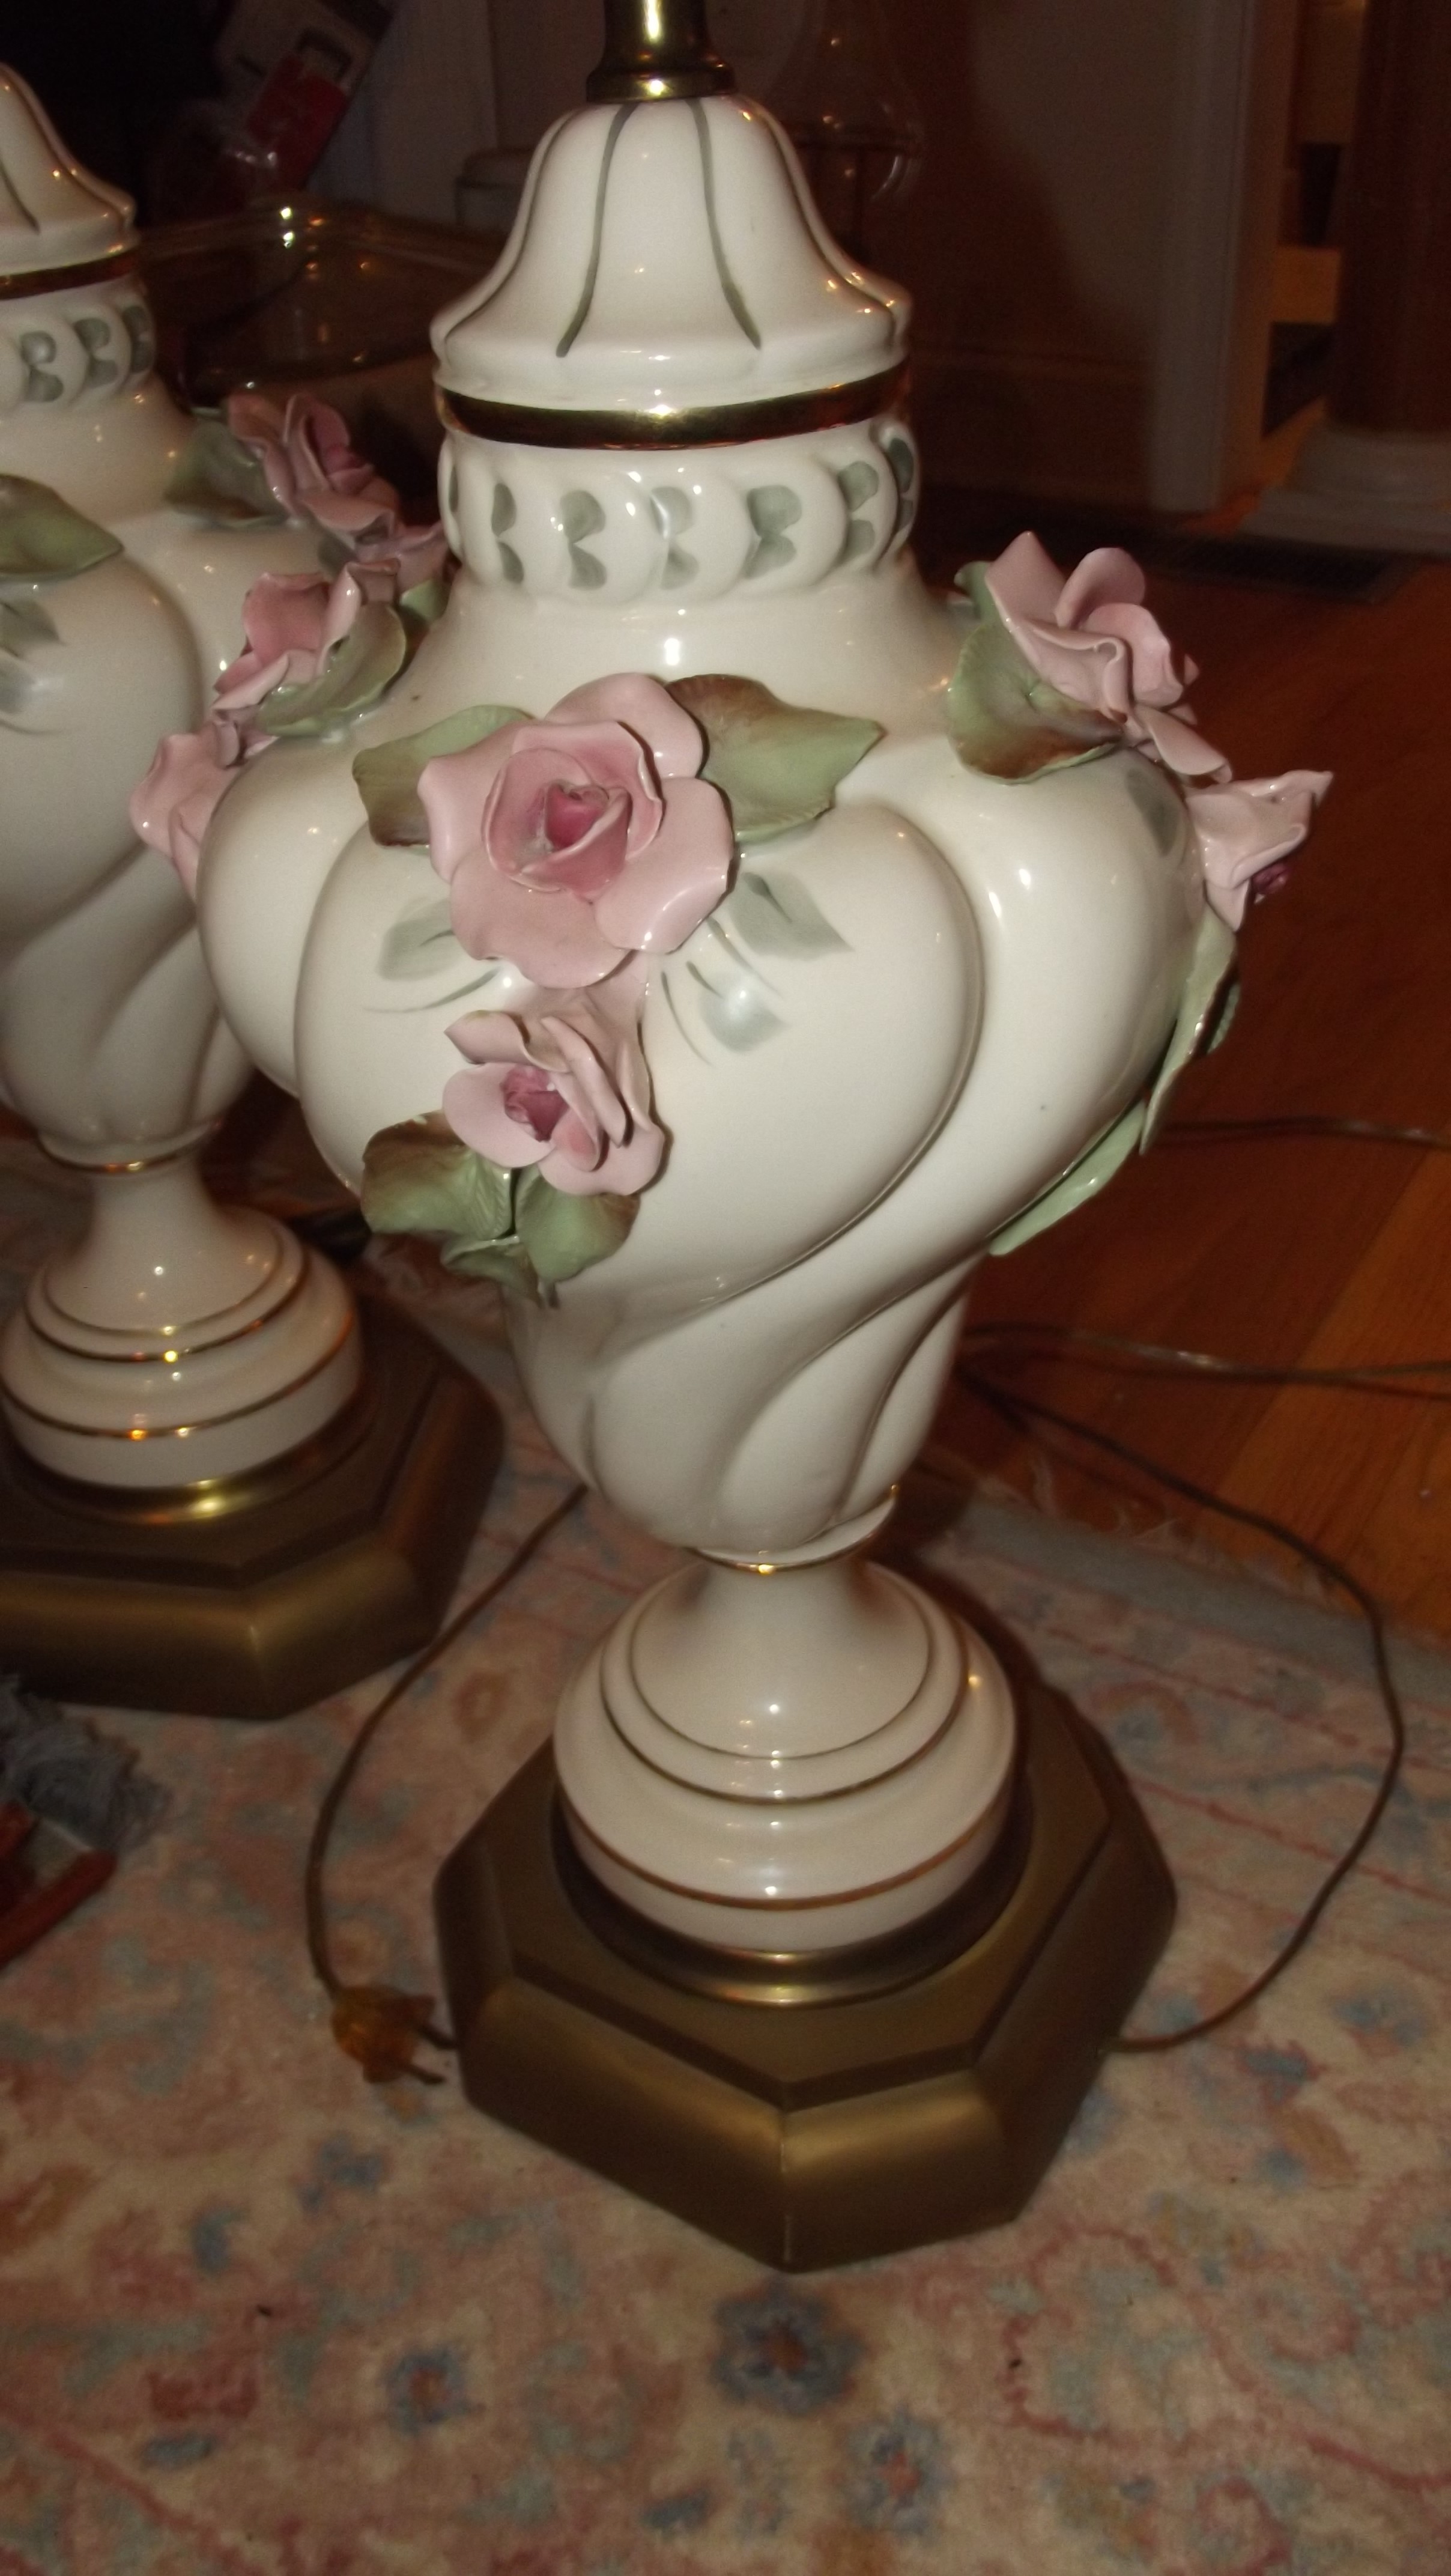 I have a pair of vintage porcelain rose lamps and